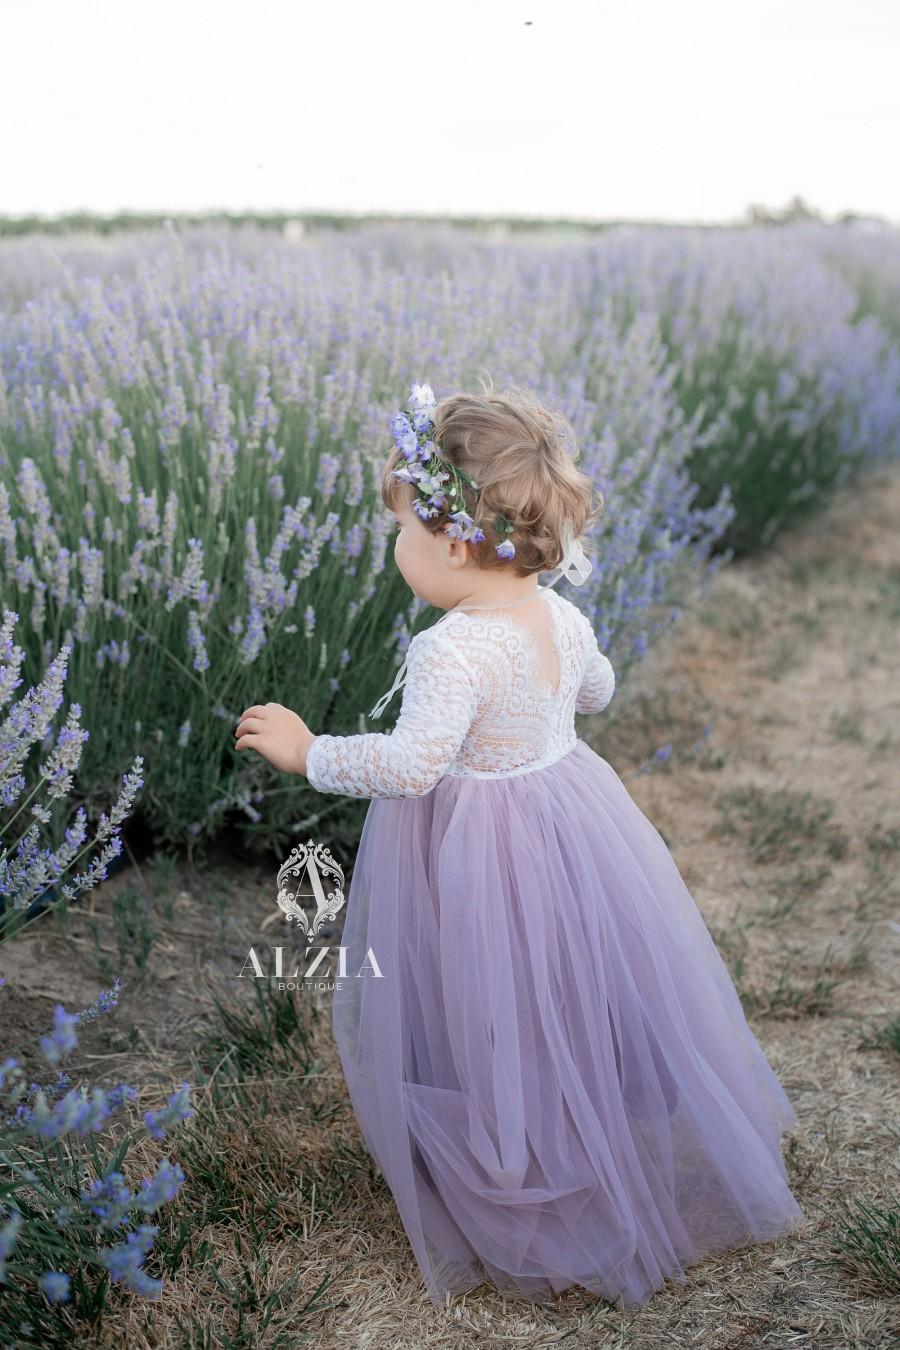 Wedding - Lilac Vintage Violet Light Dusty Purple Tulle Lace Top Scalloped Edges Back Party Flower Girl Dress